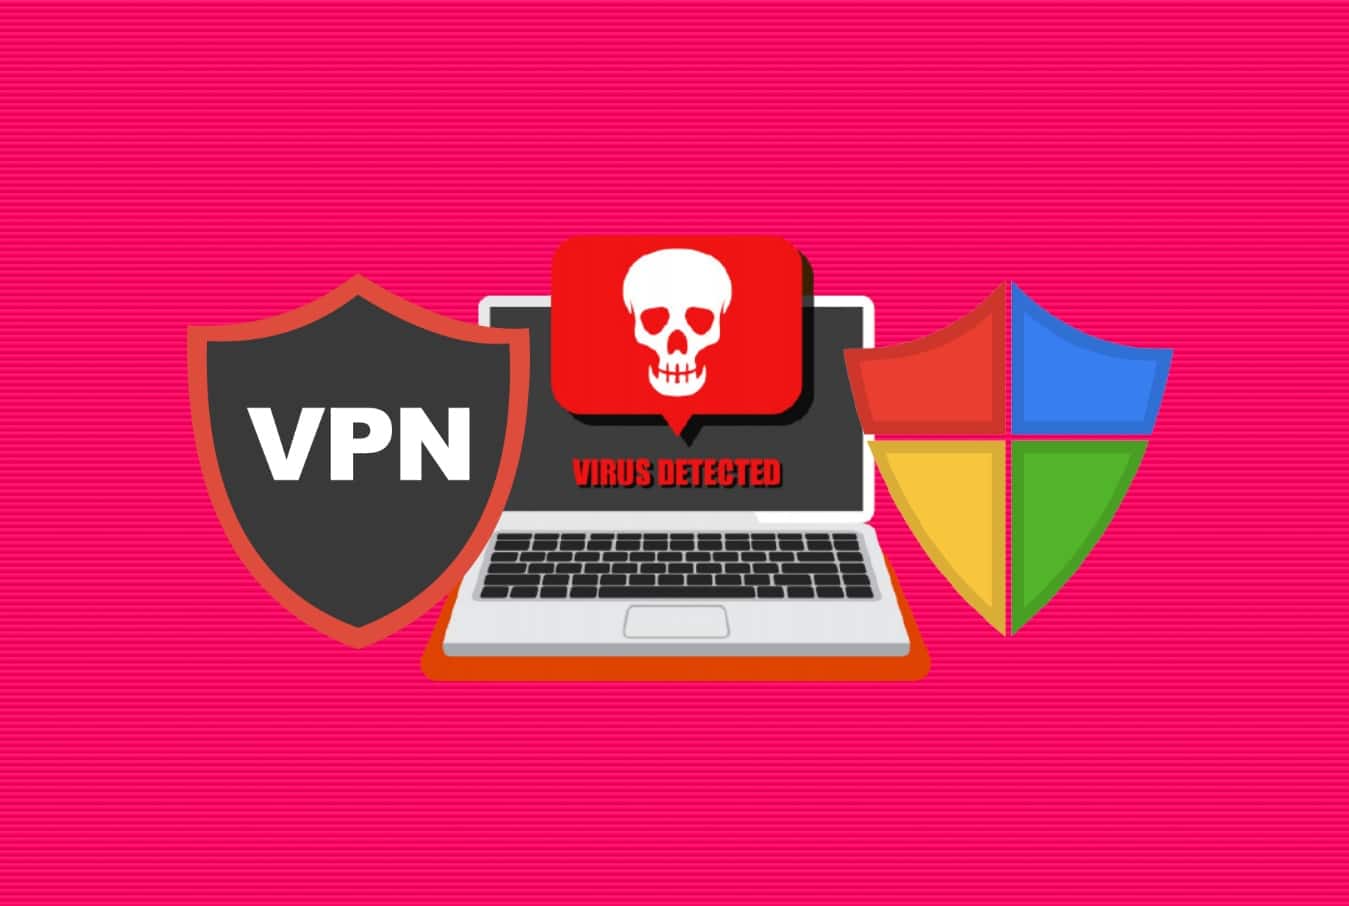 This malware hides behind free VPN, pirated security software keys